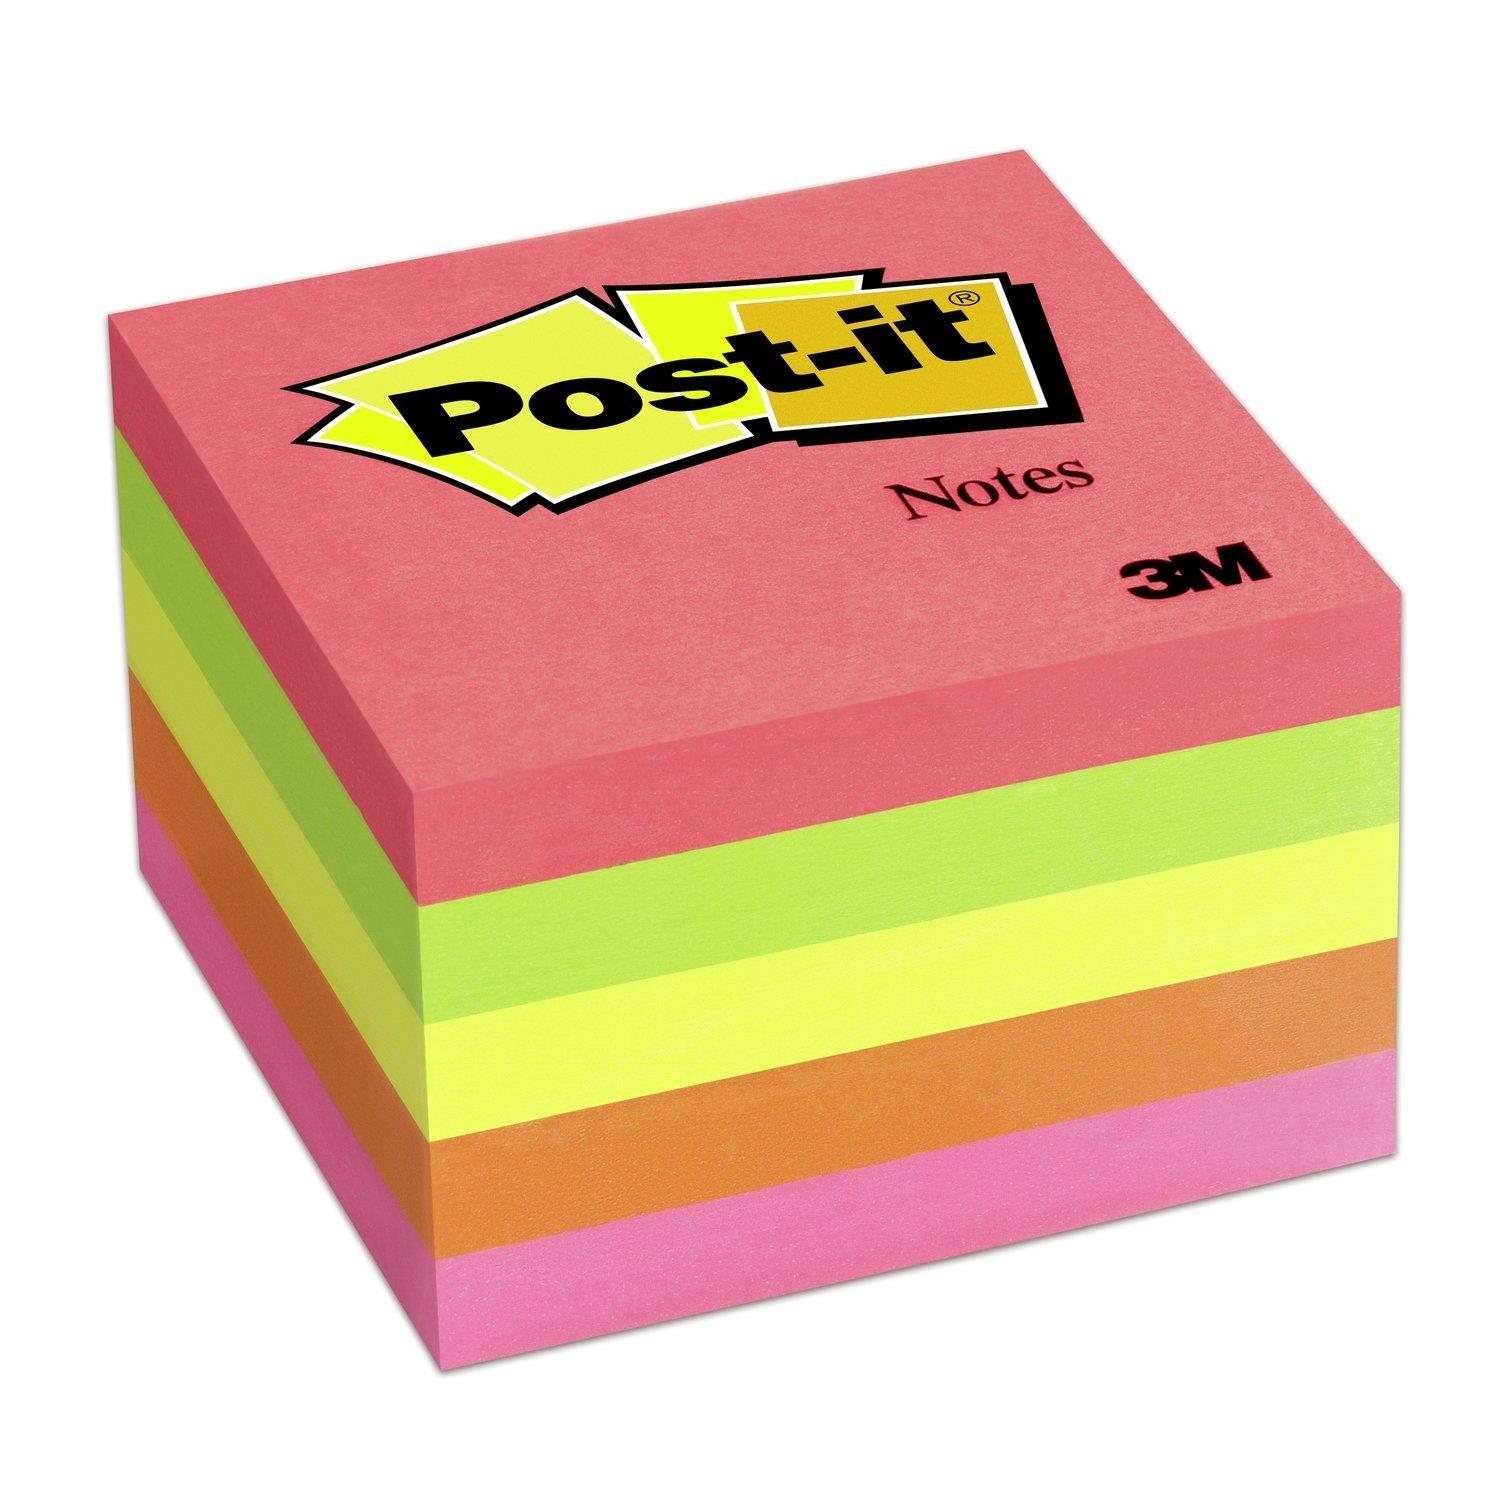  Post-it Notes - Mini Cube - Pink Coral, Neon Orange, Neon  Pink, Neon Orange - 400 Sheets - 51 mm x 51 mm : Office Products